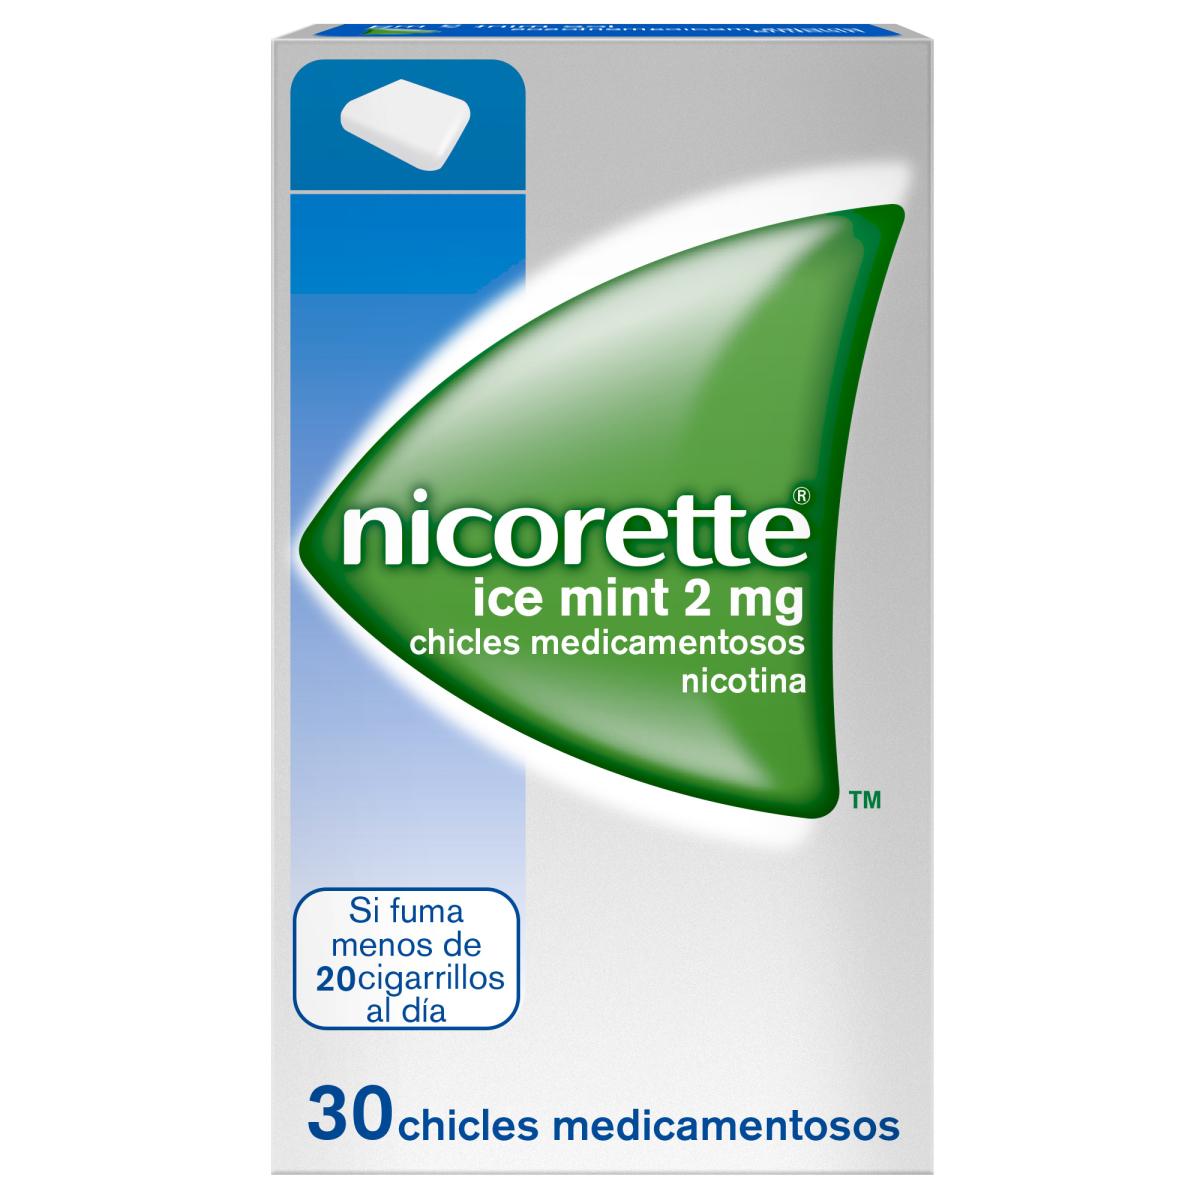 Nicotinell 2 MG Mint 96 Chicles, Comprar Online